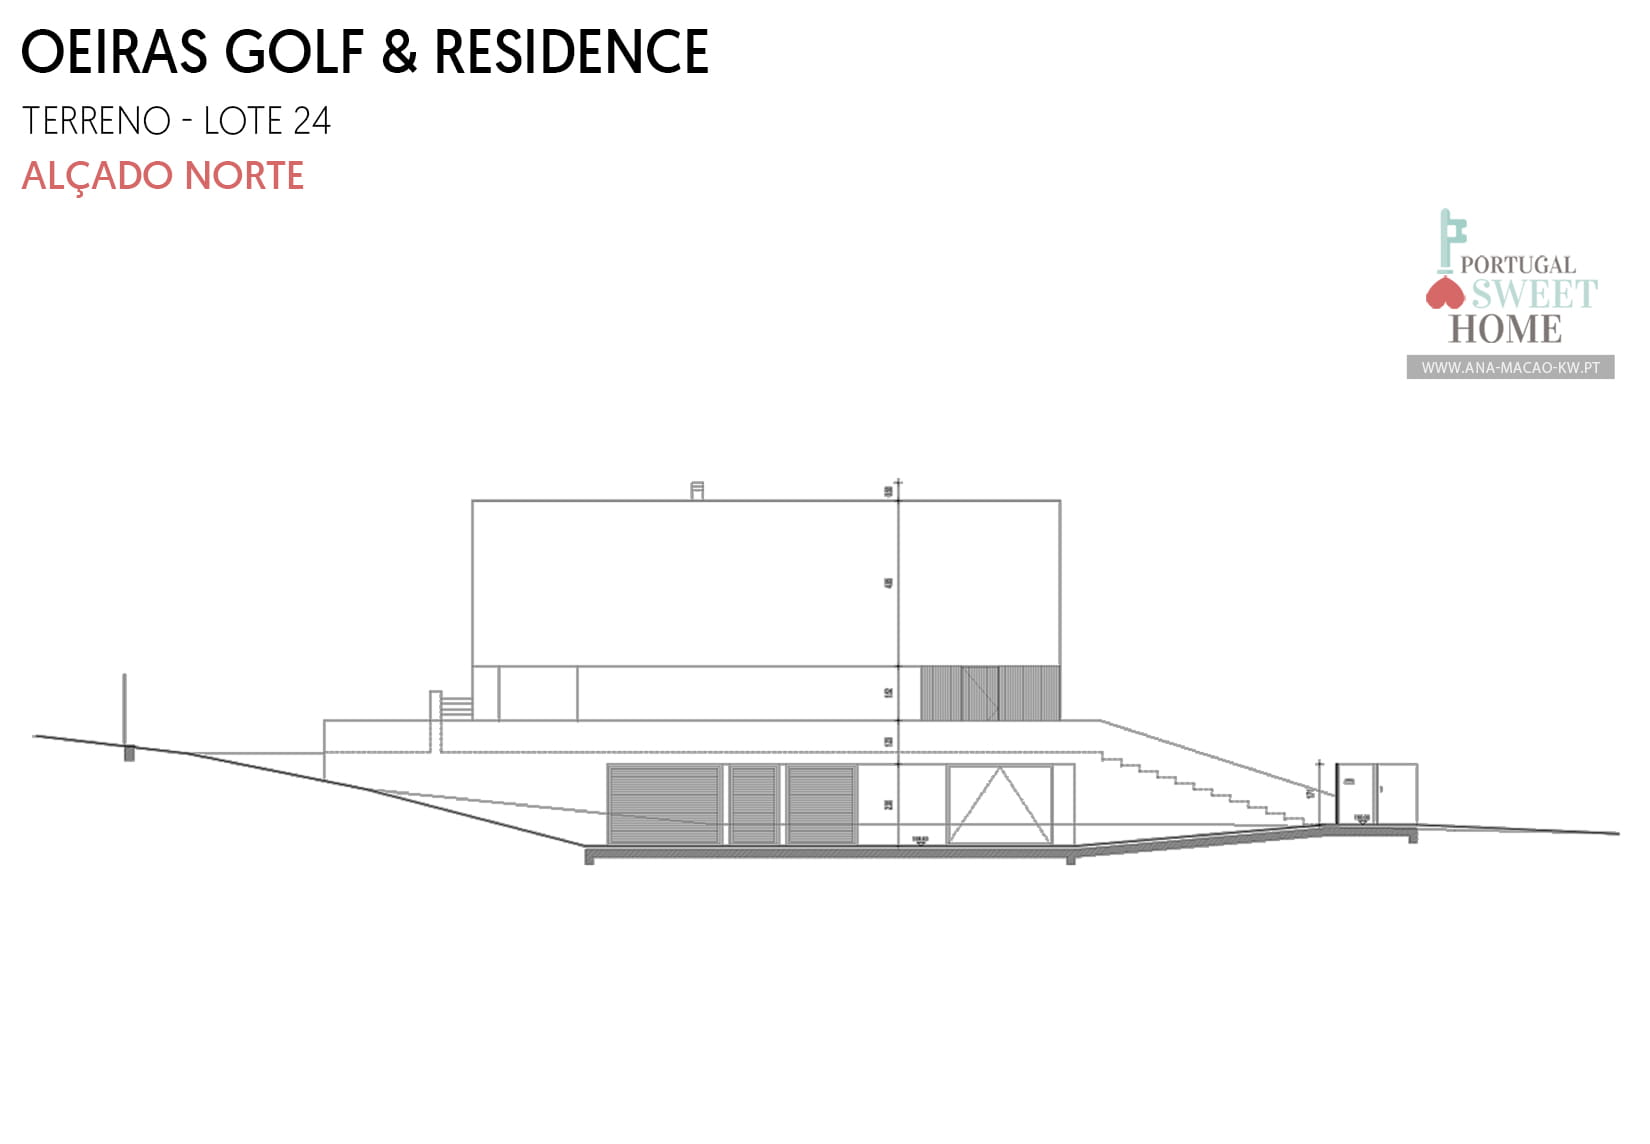 North Elevation (Project)